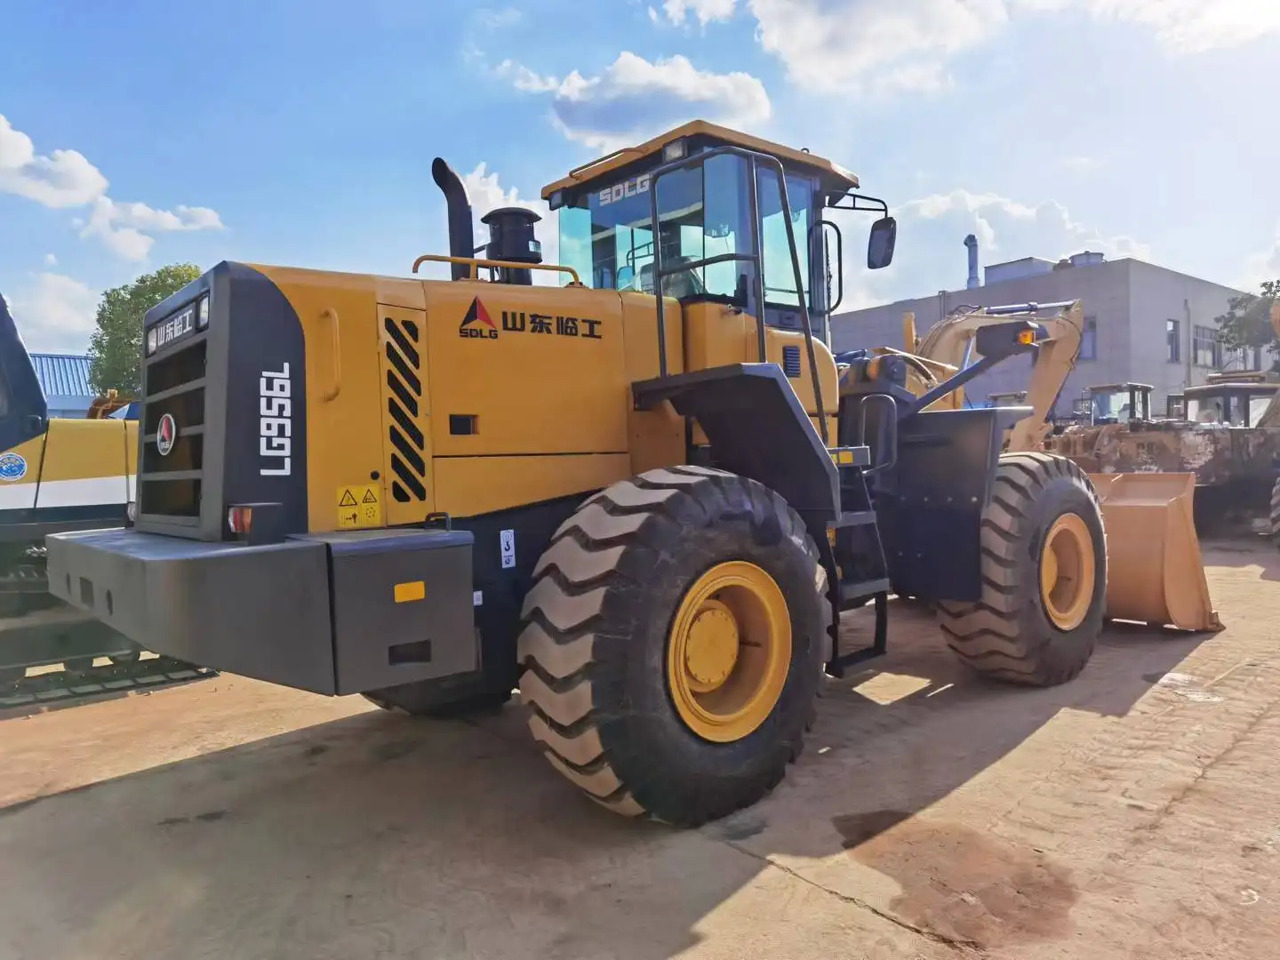 Wheel loader Used SDLlG Wheel loader 936 956 on sale with good running condition